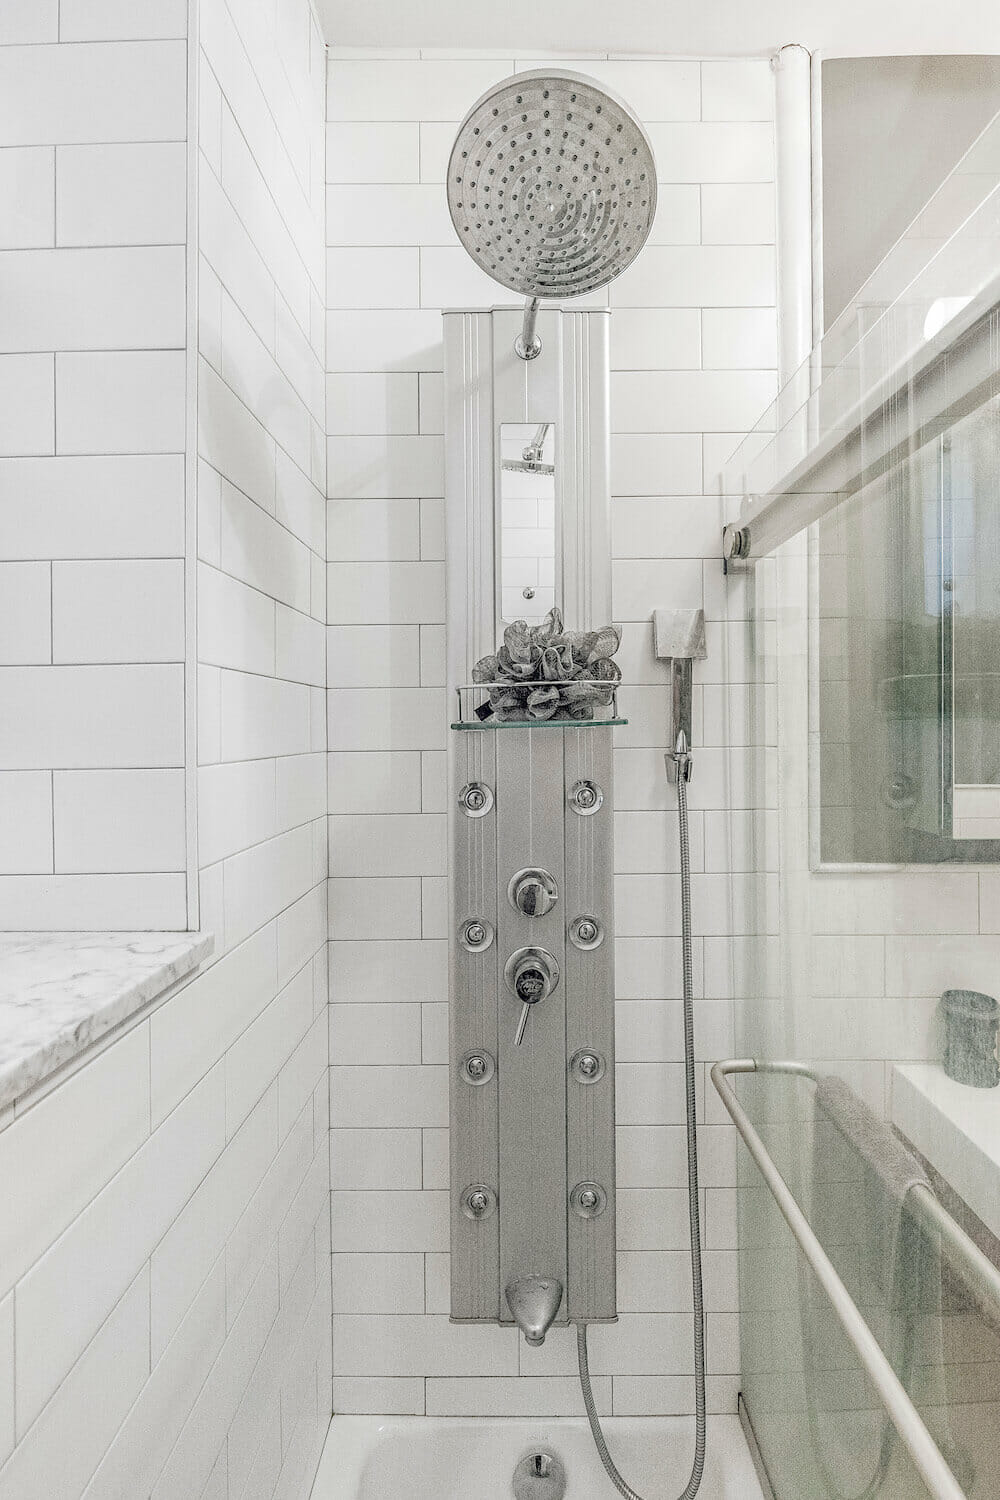 Narrow white shower area with nickel oversized shower head and bathroom fixtures after renovation